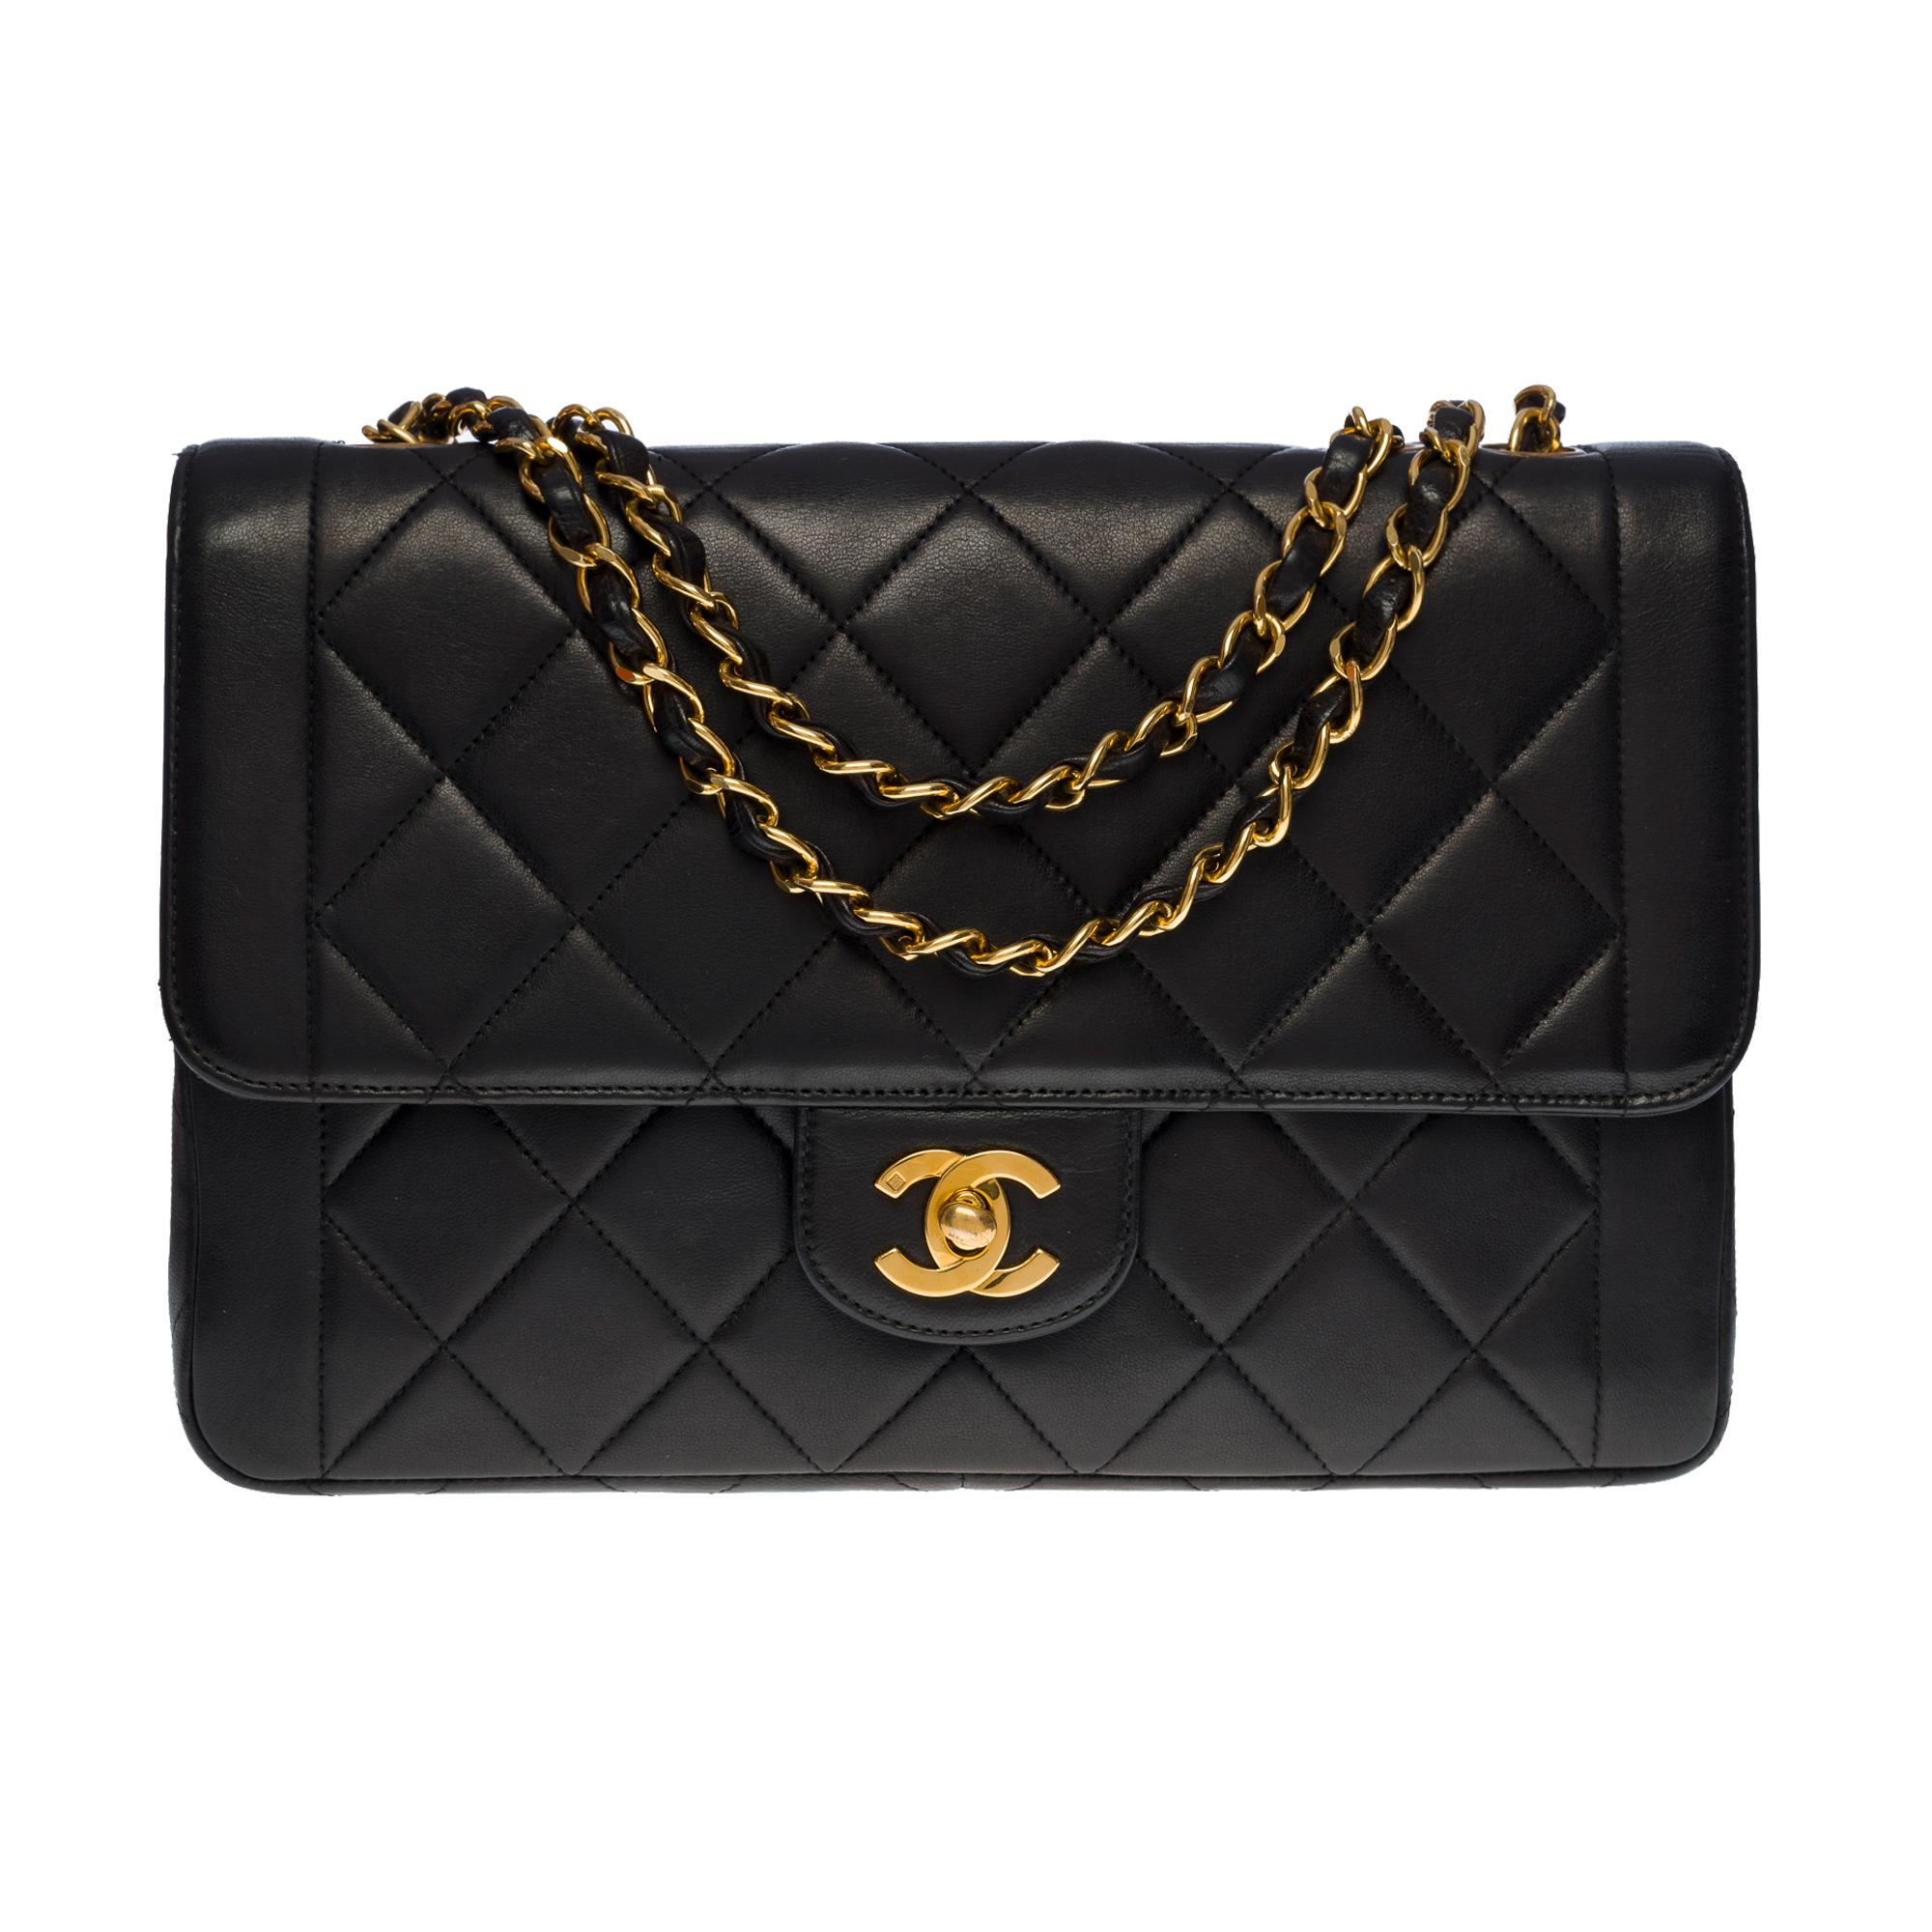 Amazing Chanel Timeless/Classic single flap shoulder bag in black quilted lambskin, gold-plated metal hardware, a gold-plated metal chain handle interwoven with black leather for a hand, shoulder or crossbody support

Gold metal flap closure
A patch